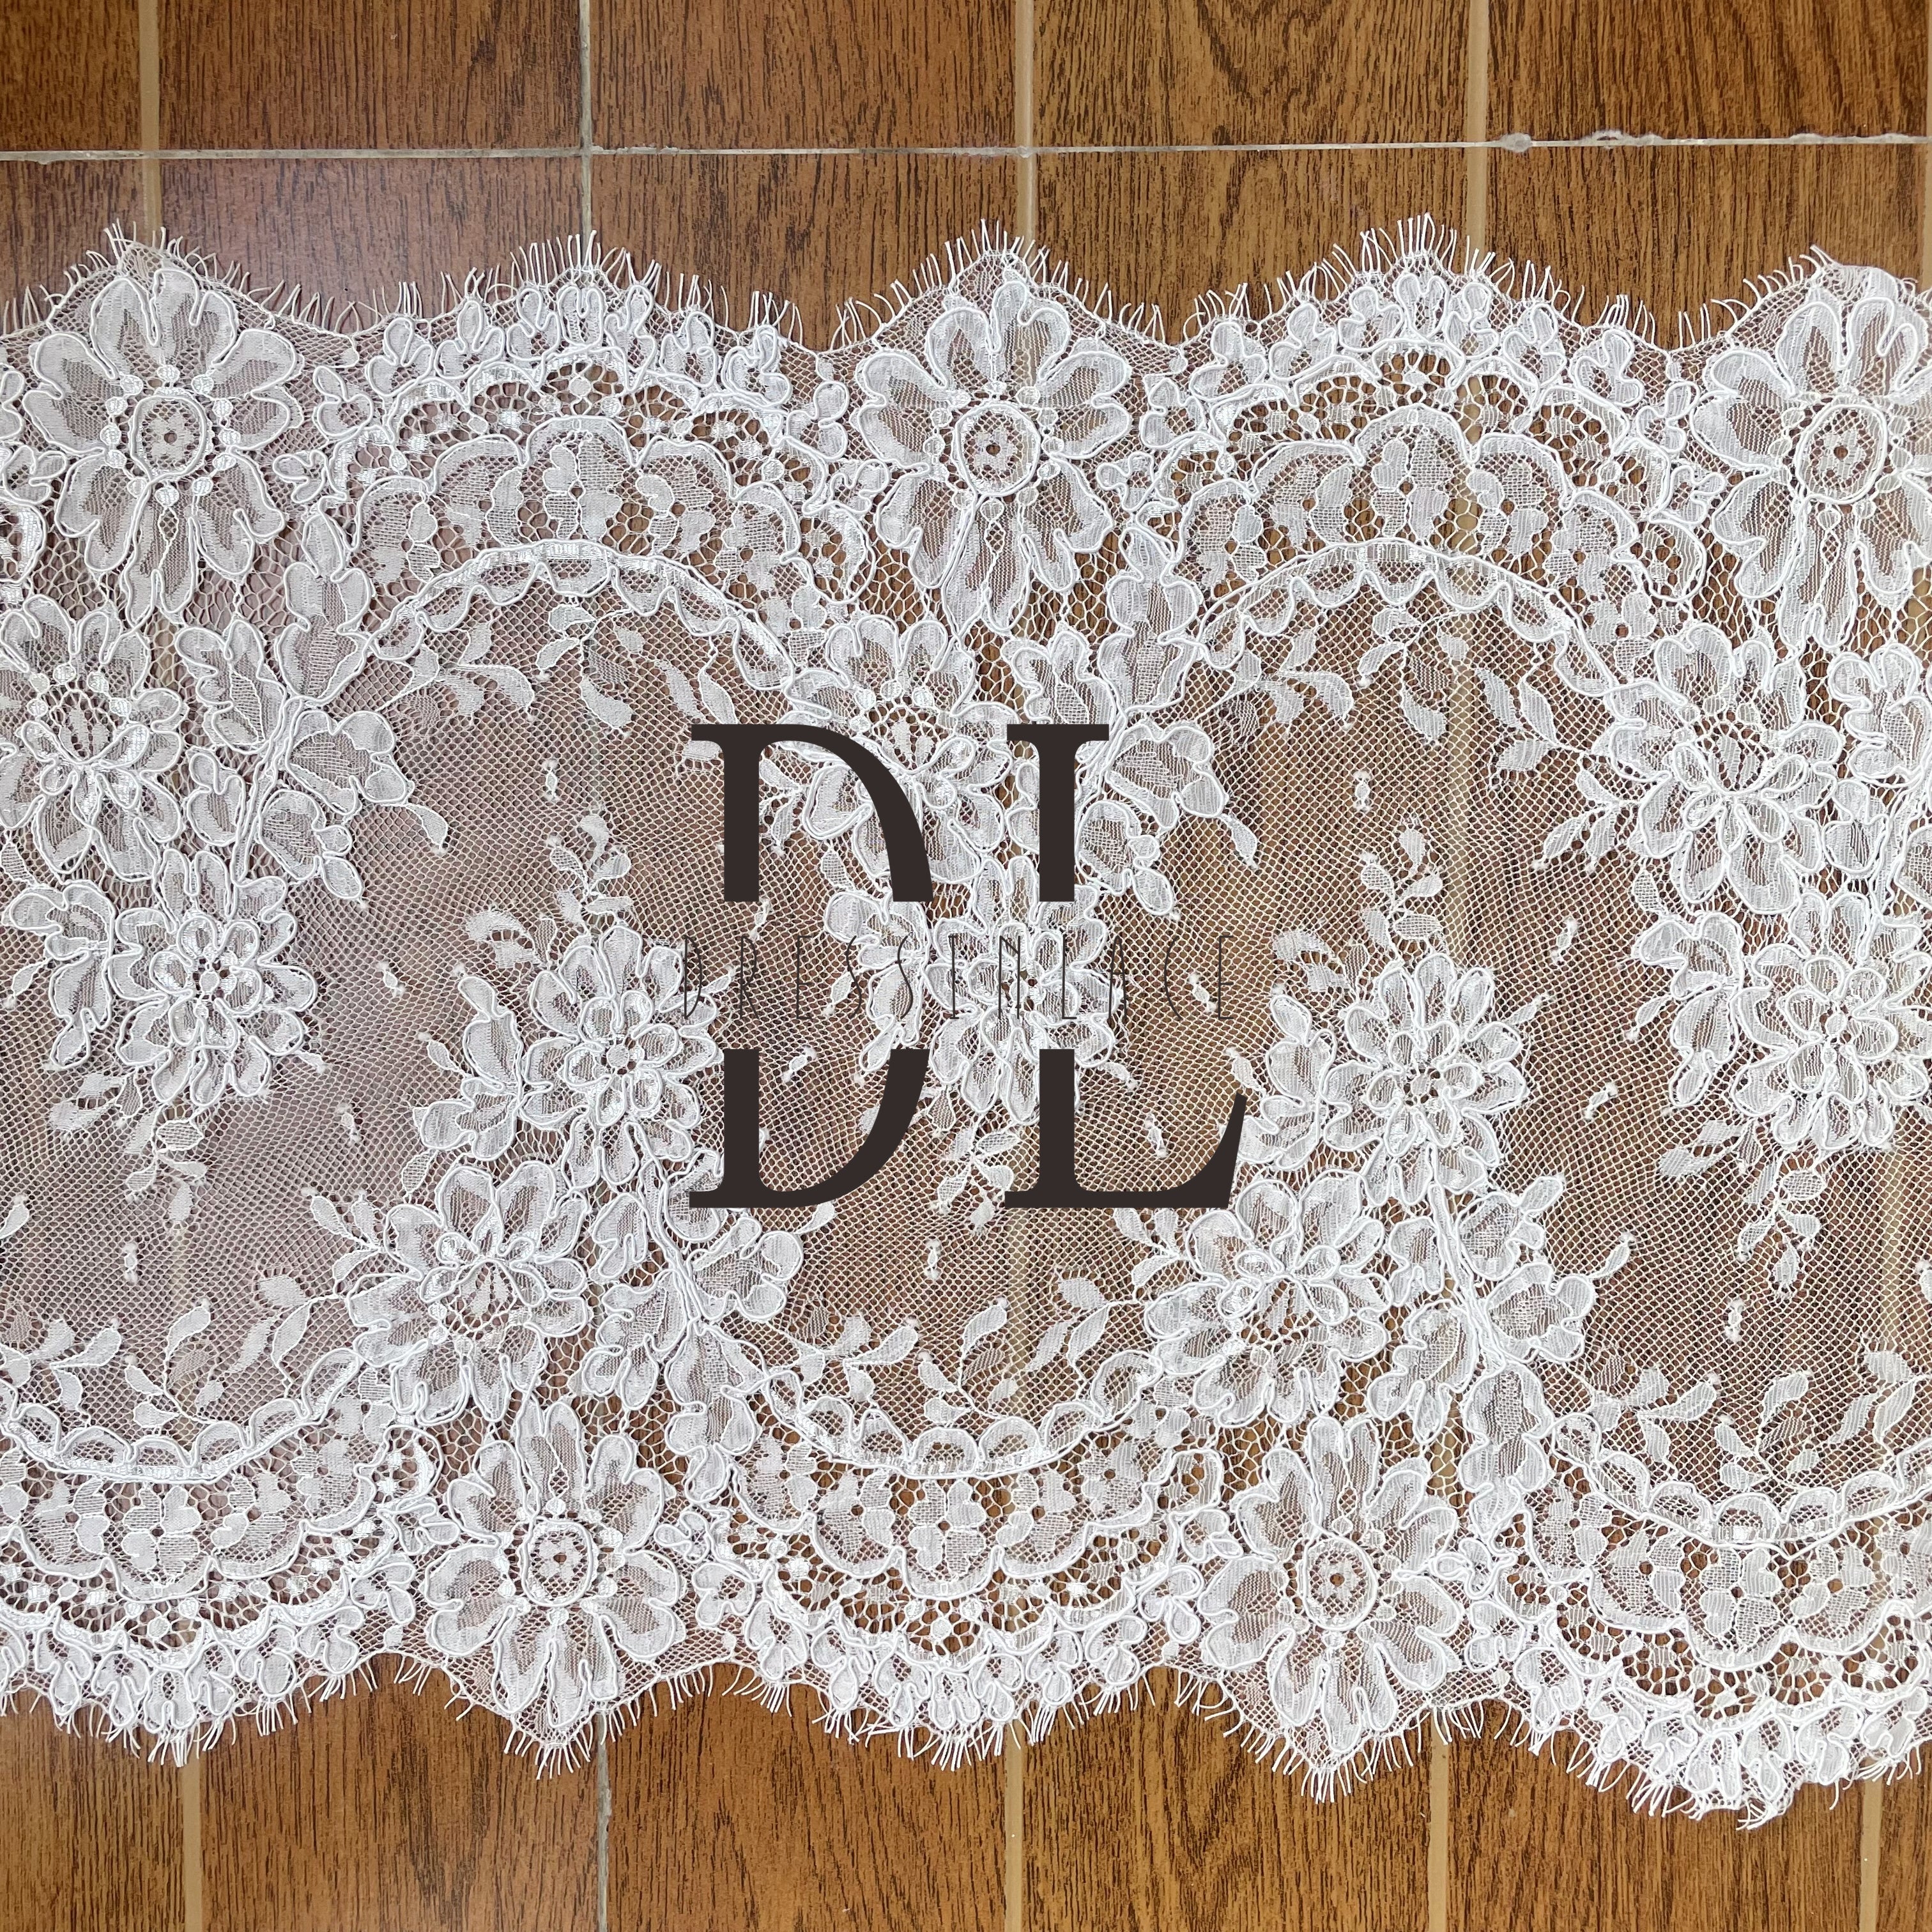 DTL37196 Classic Trimming Lace with Elegant Vehicle Boning for Crafts and Sewing DTL37196